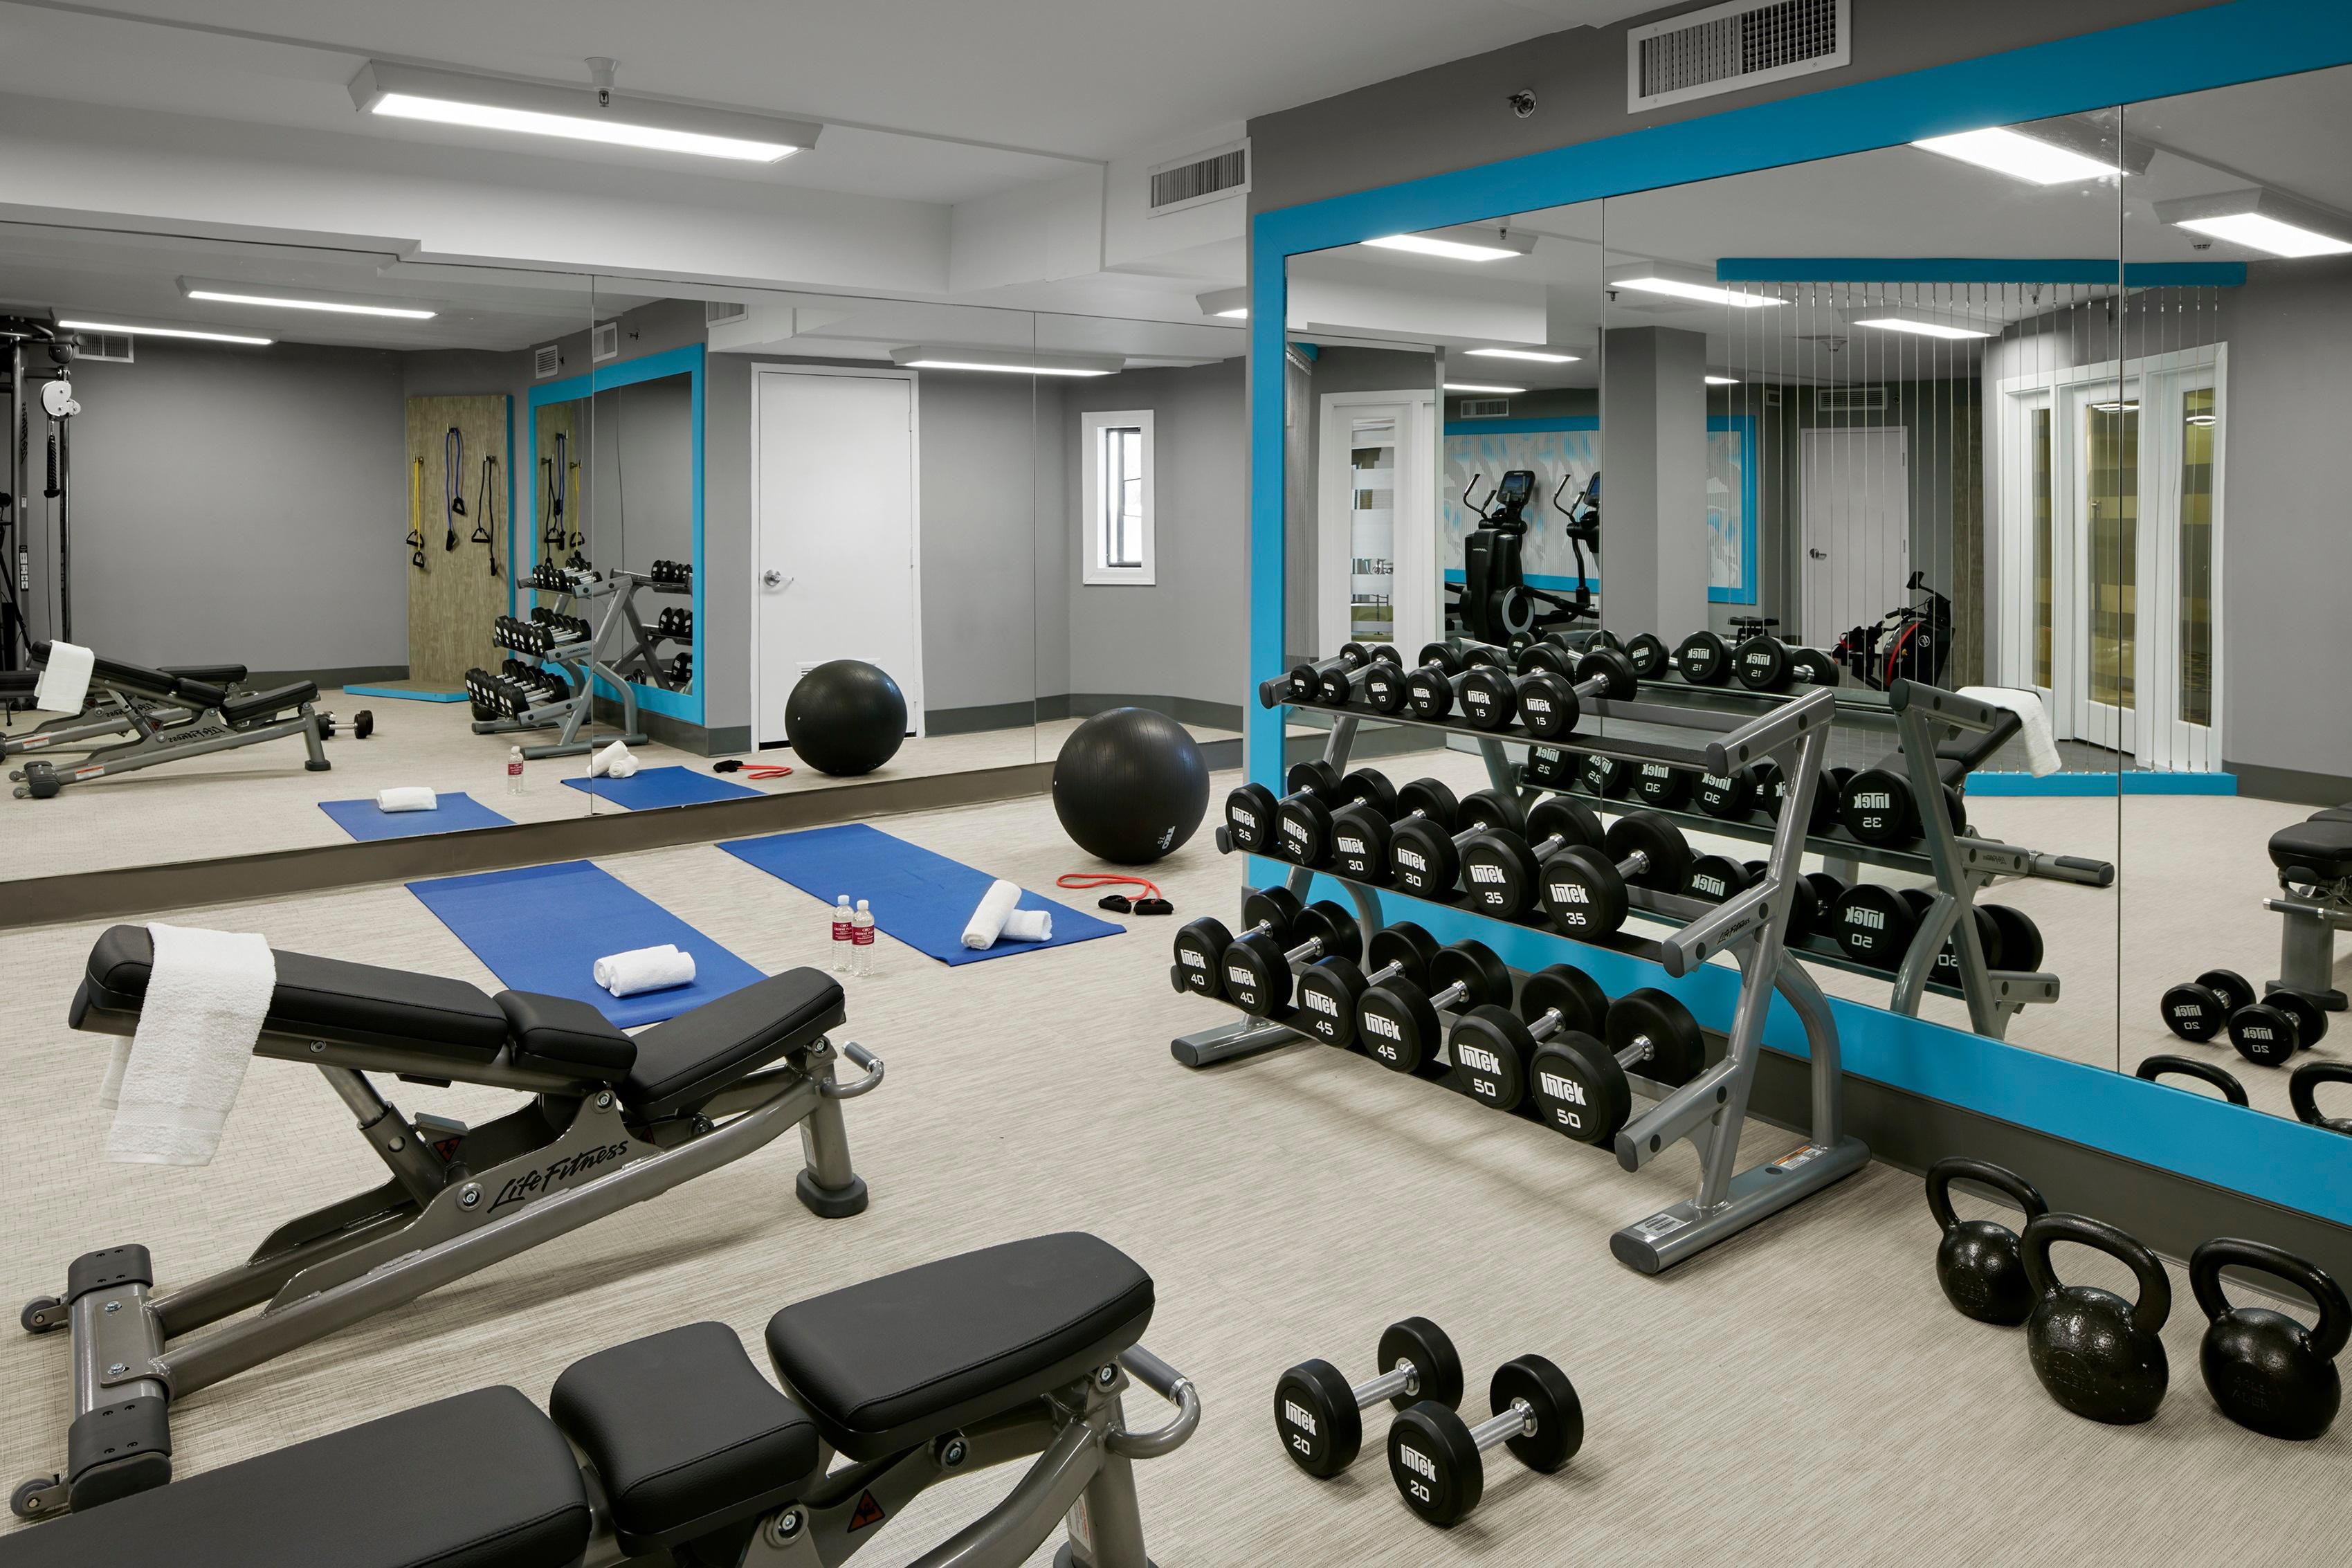 Keep up with your daily workout routine in our Fitness Center